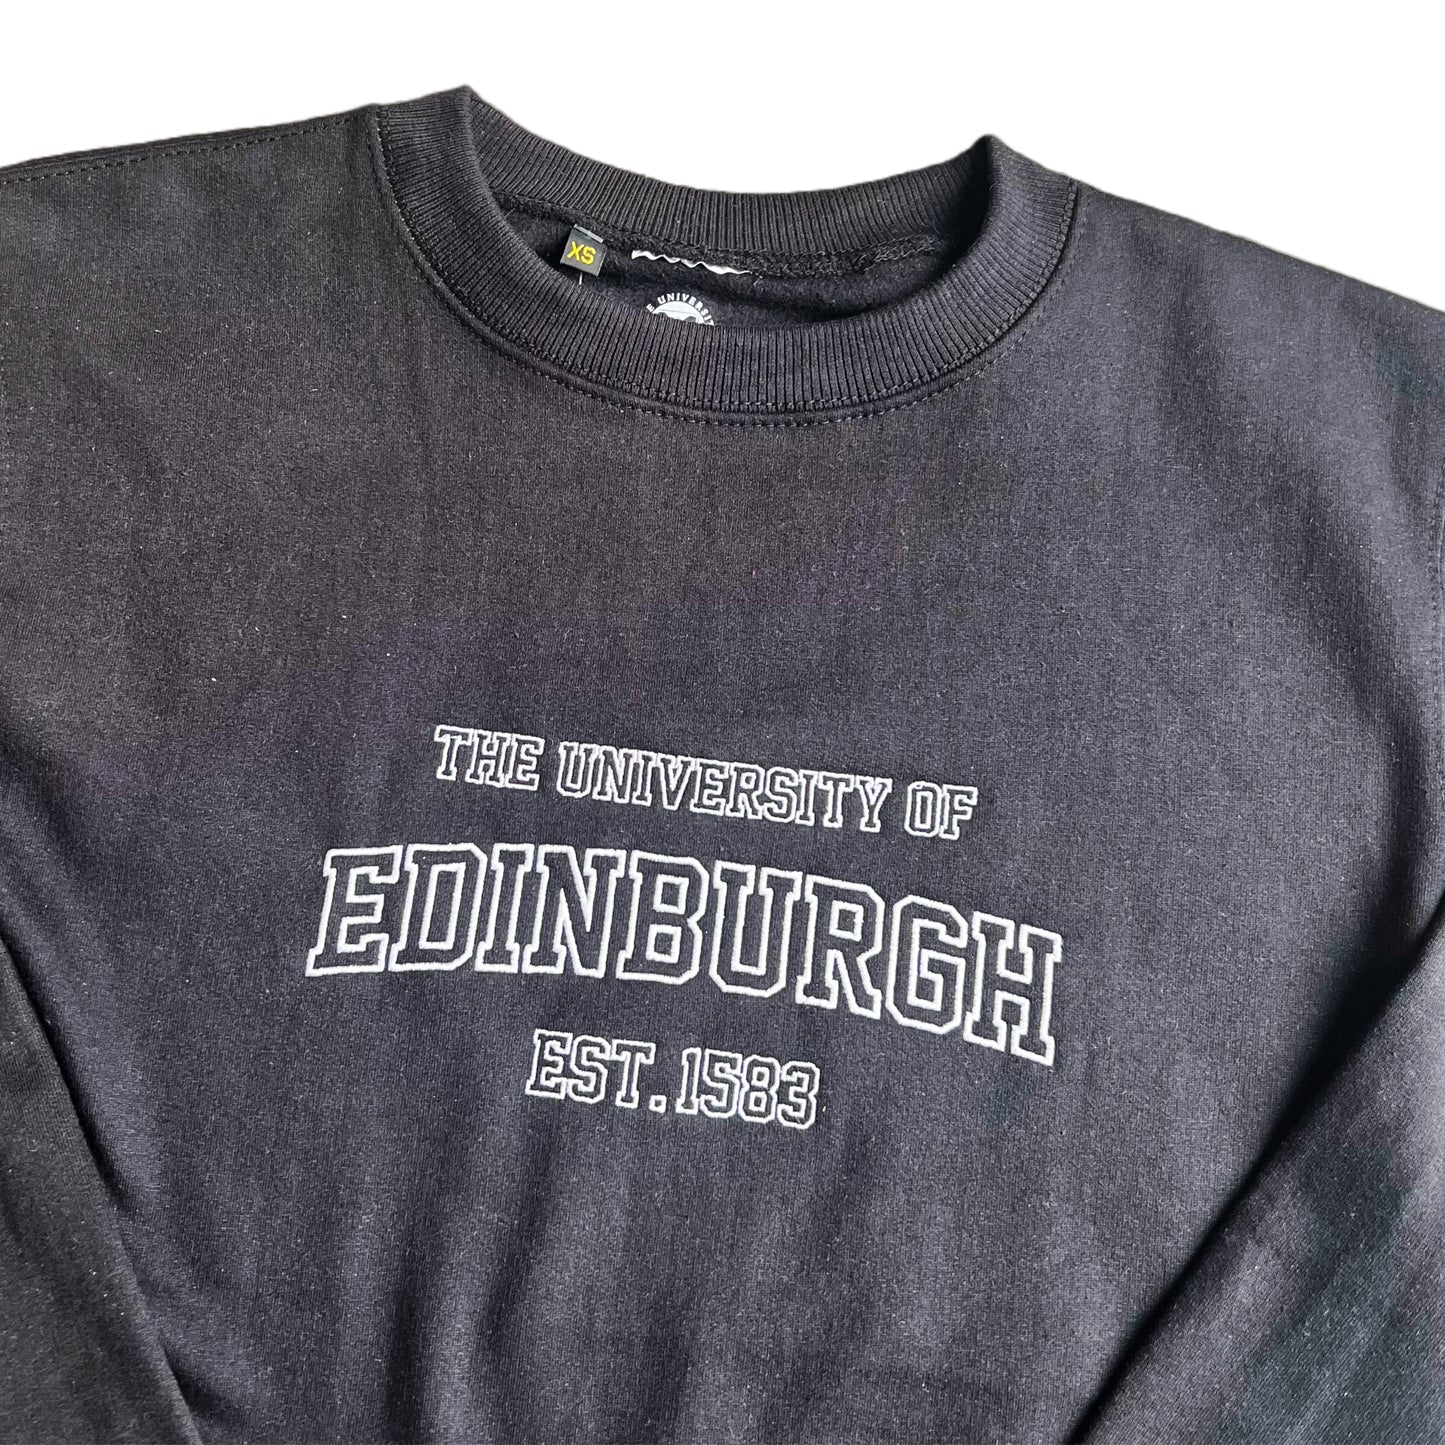 Close up of white embroidered text reading 'the University of Edinburgh EST. 1583' on a black sweatshirt.